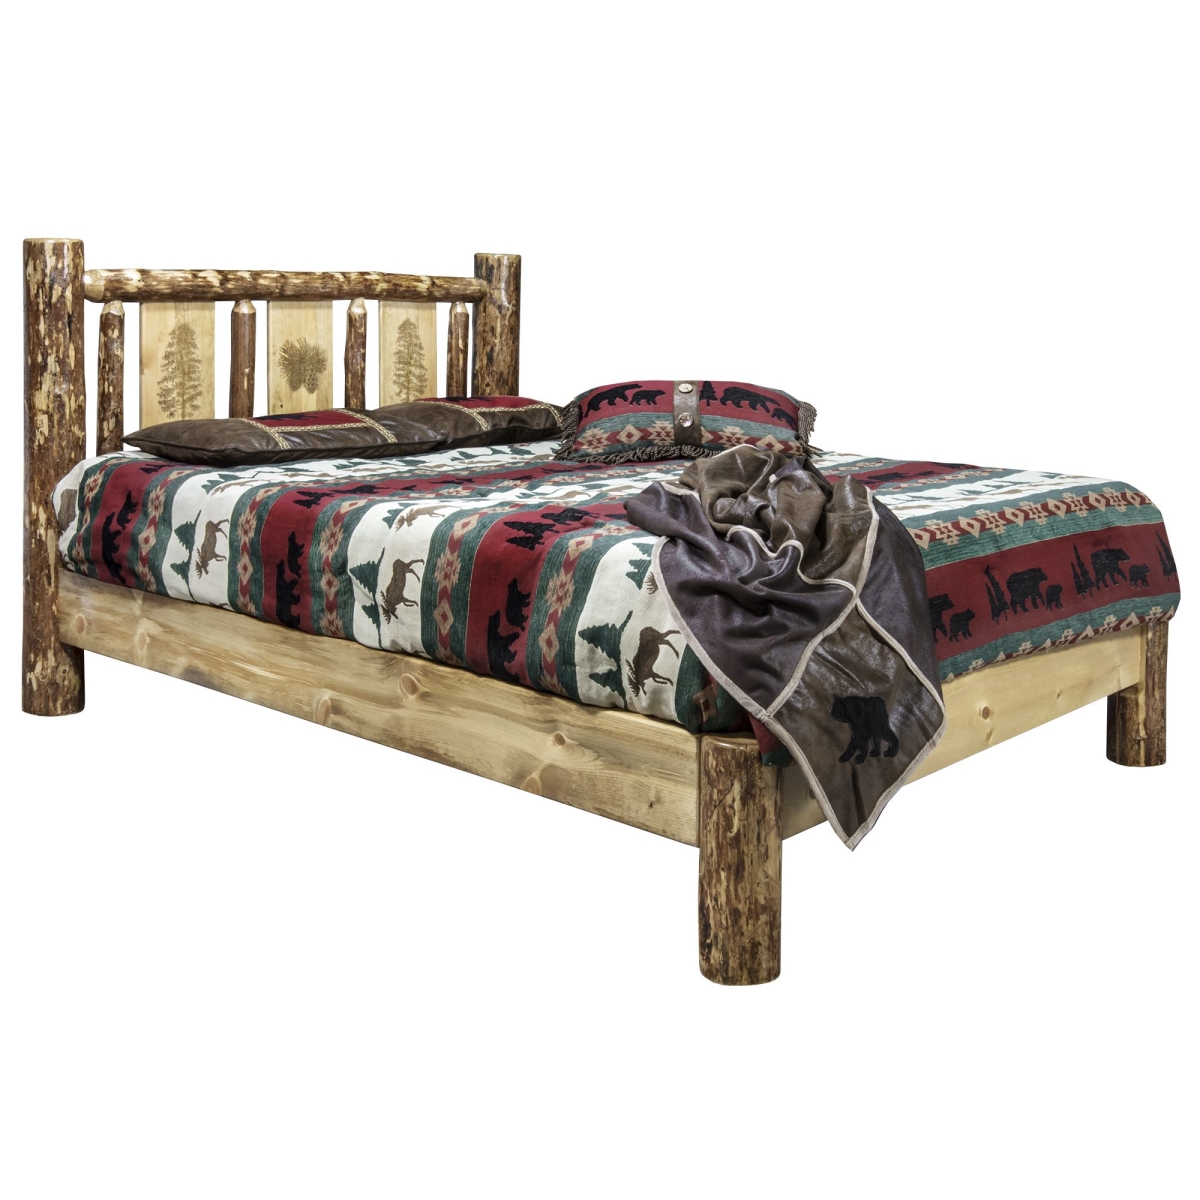 MWGCPBTLZPINE Glacier Country Collection Platform Bed with Laser Engraved Pine Tree Design - Twin Size -  Montana Woodworks